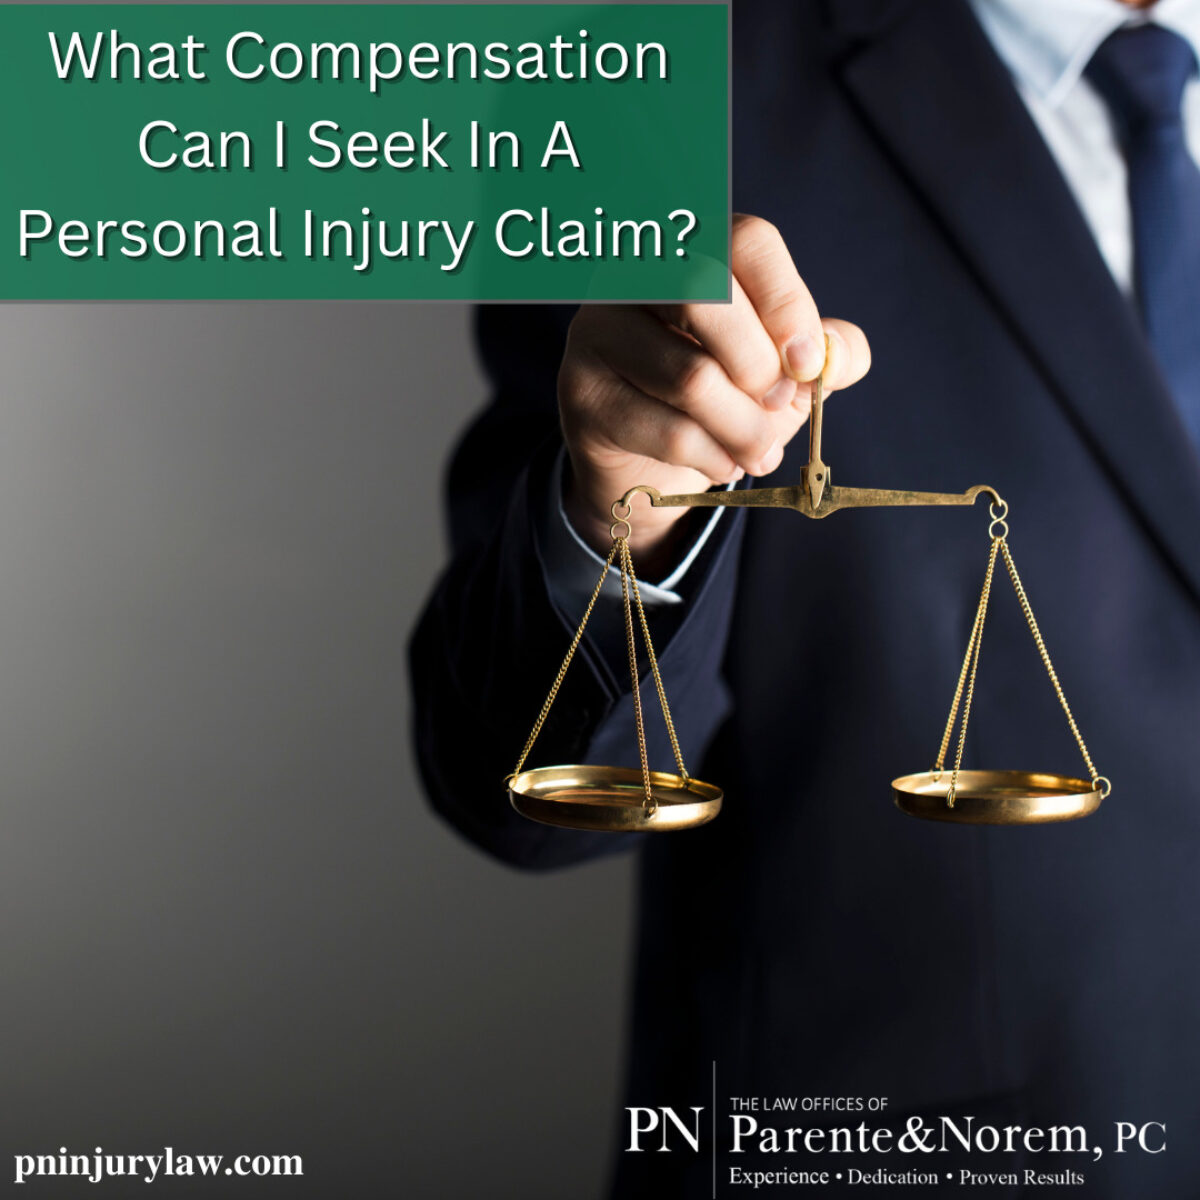 P&N BLOG | What Compensation Can I Seek In A Personal Injury Claim?